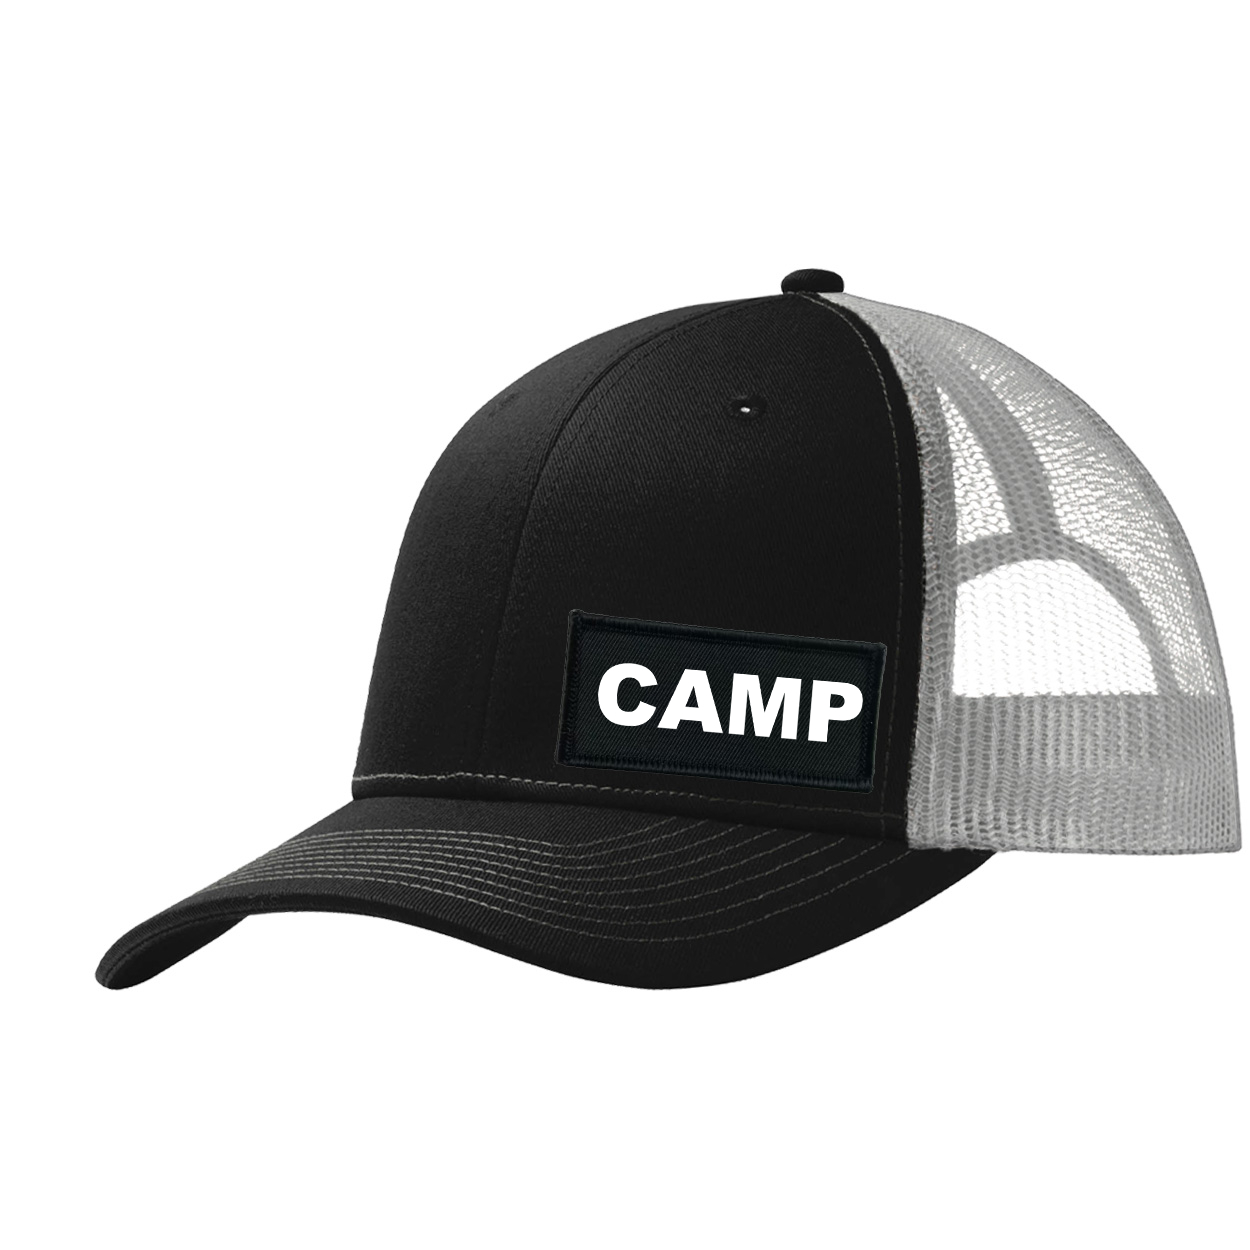 Camp Brand Logo Night Out Woven Patch Snapback Trucker Hat Black/Gray 